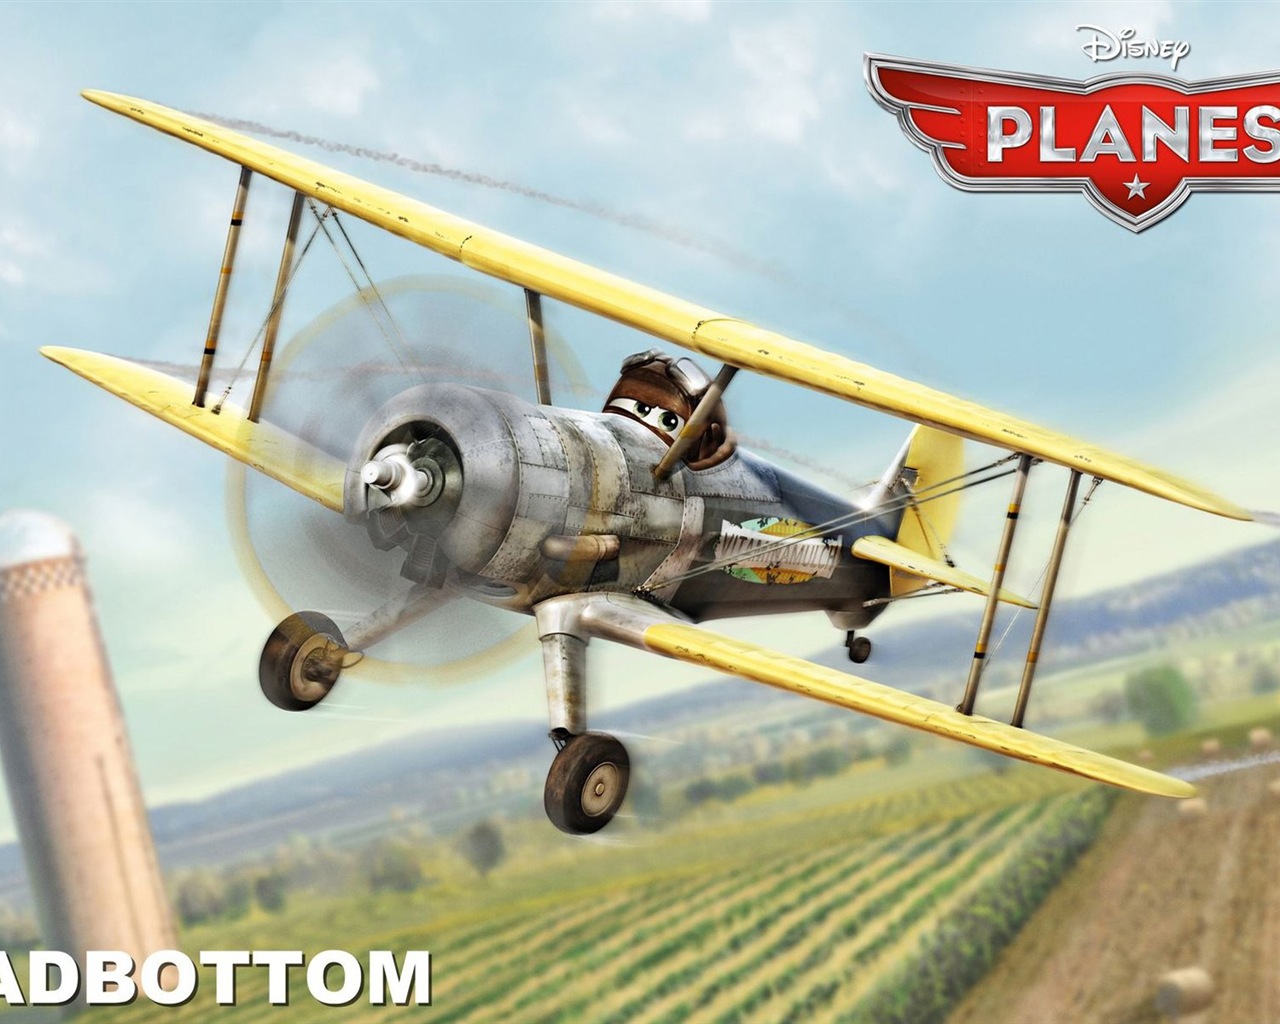 Planes 2013 HD wallpapers #8 - 1280x1024